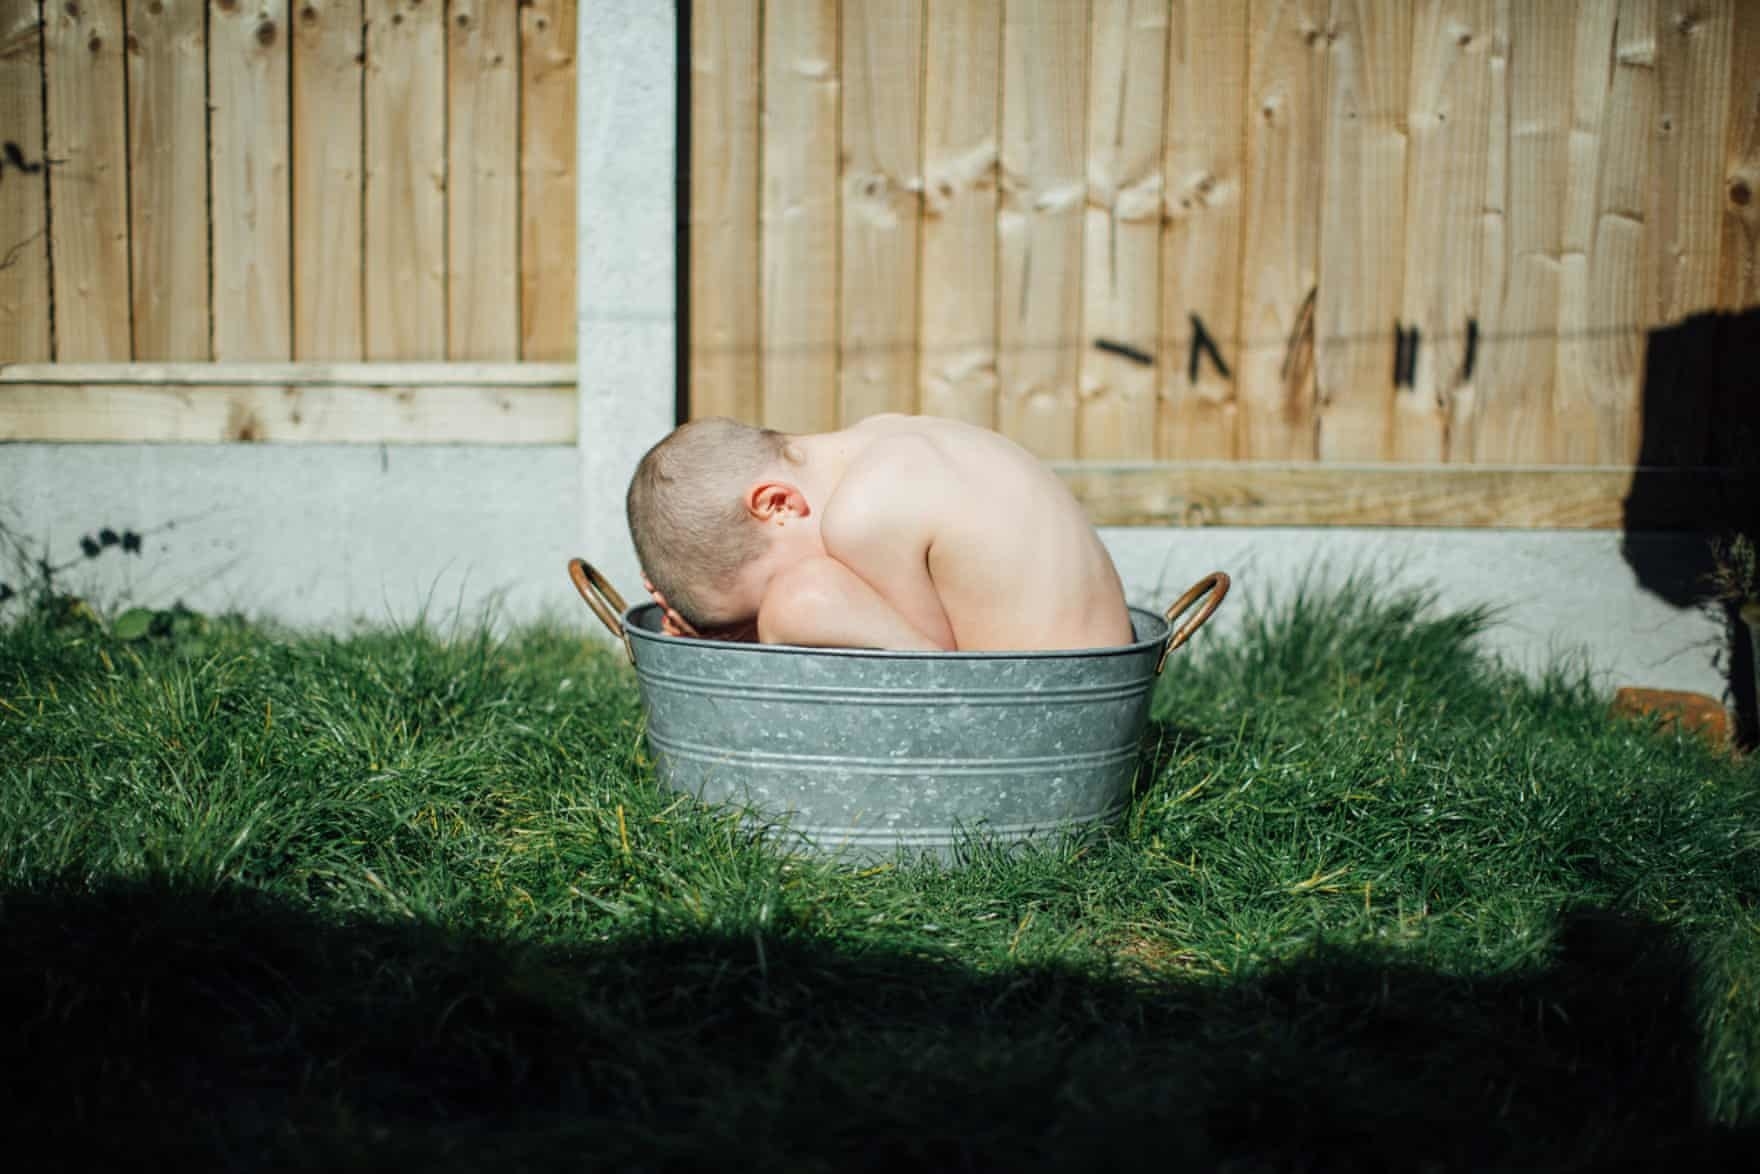 A young boy with close-cropped hair shits in a pail on the grass in front of a wooden fence